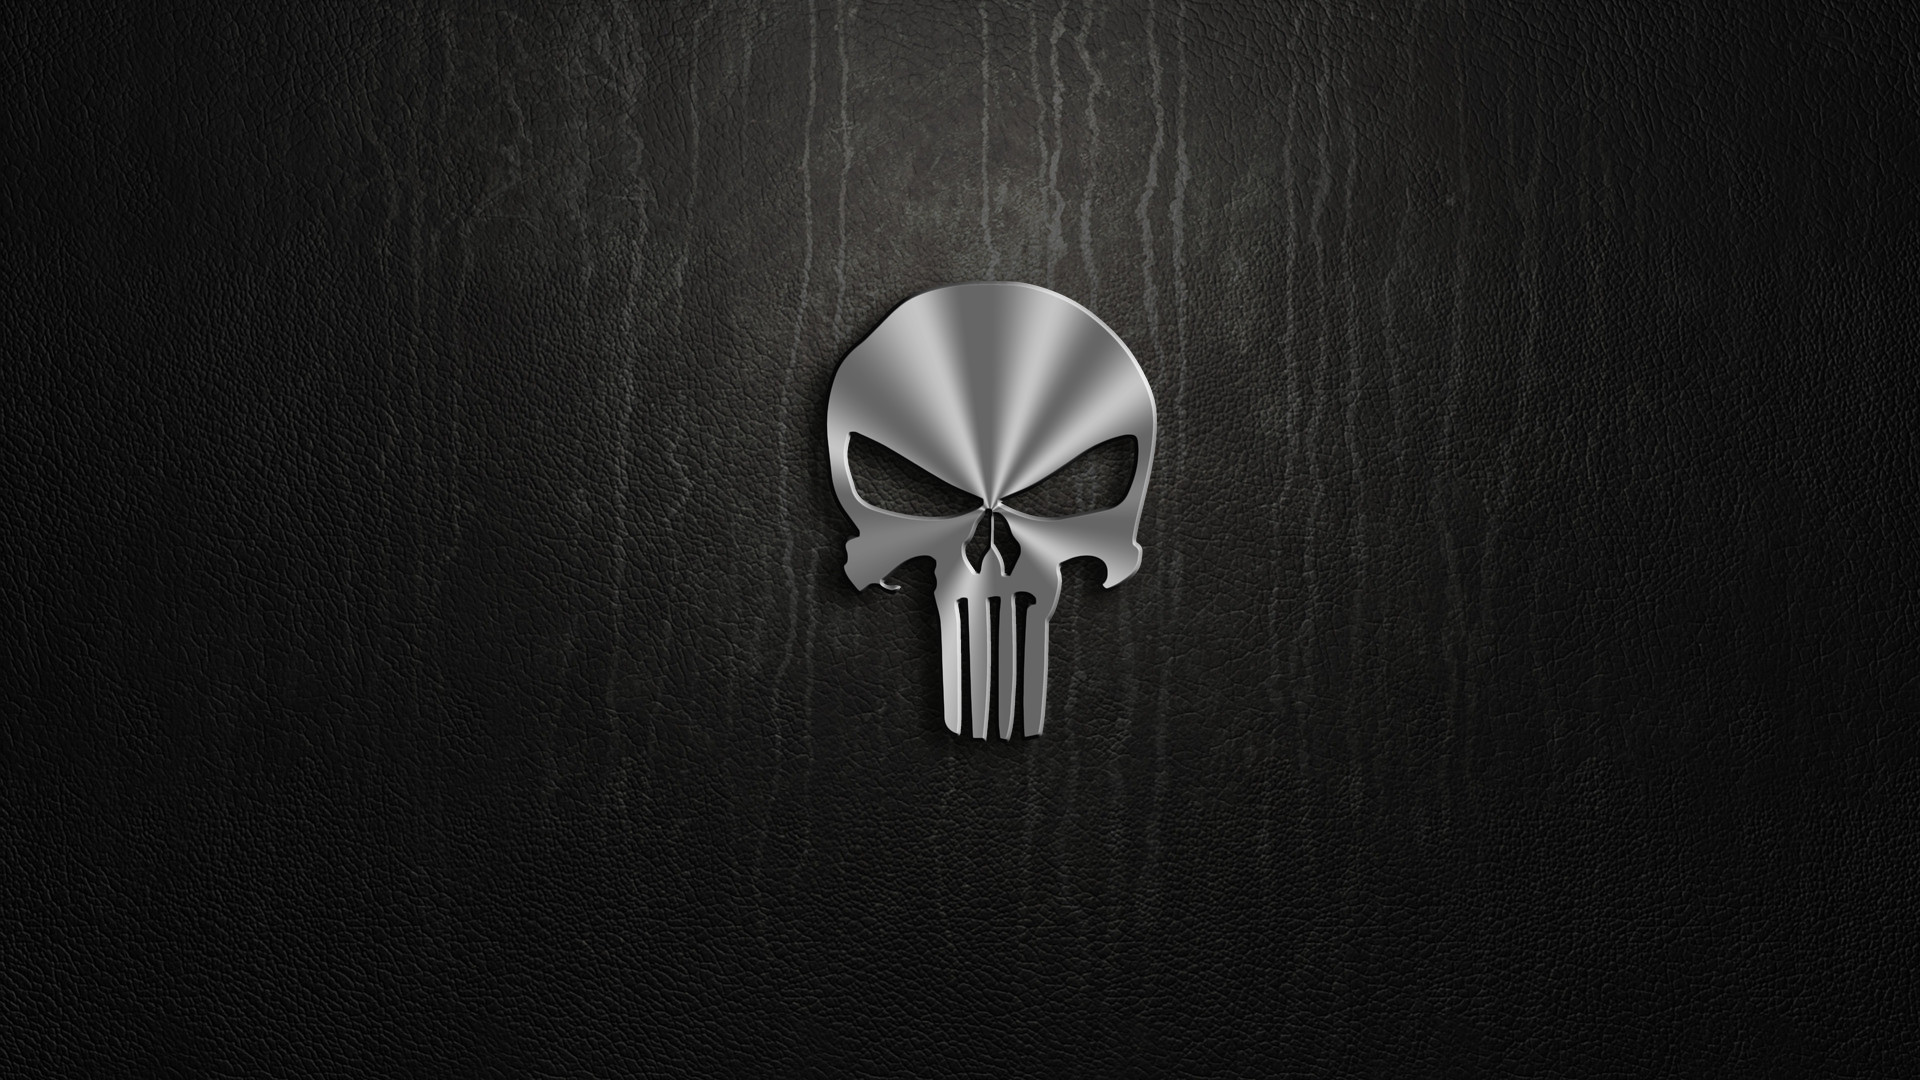 1920x1080 Punisher Wallpaper Pack Android Apps on Google Play | HD Wallpapers |  Pinterest | Punisher and Full hd pictures